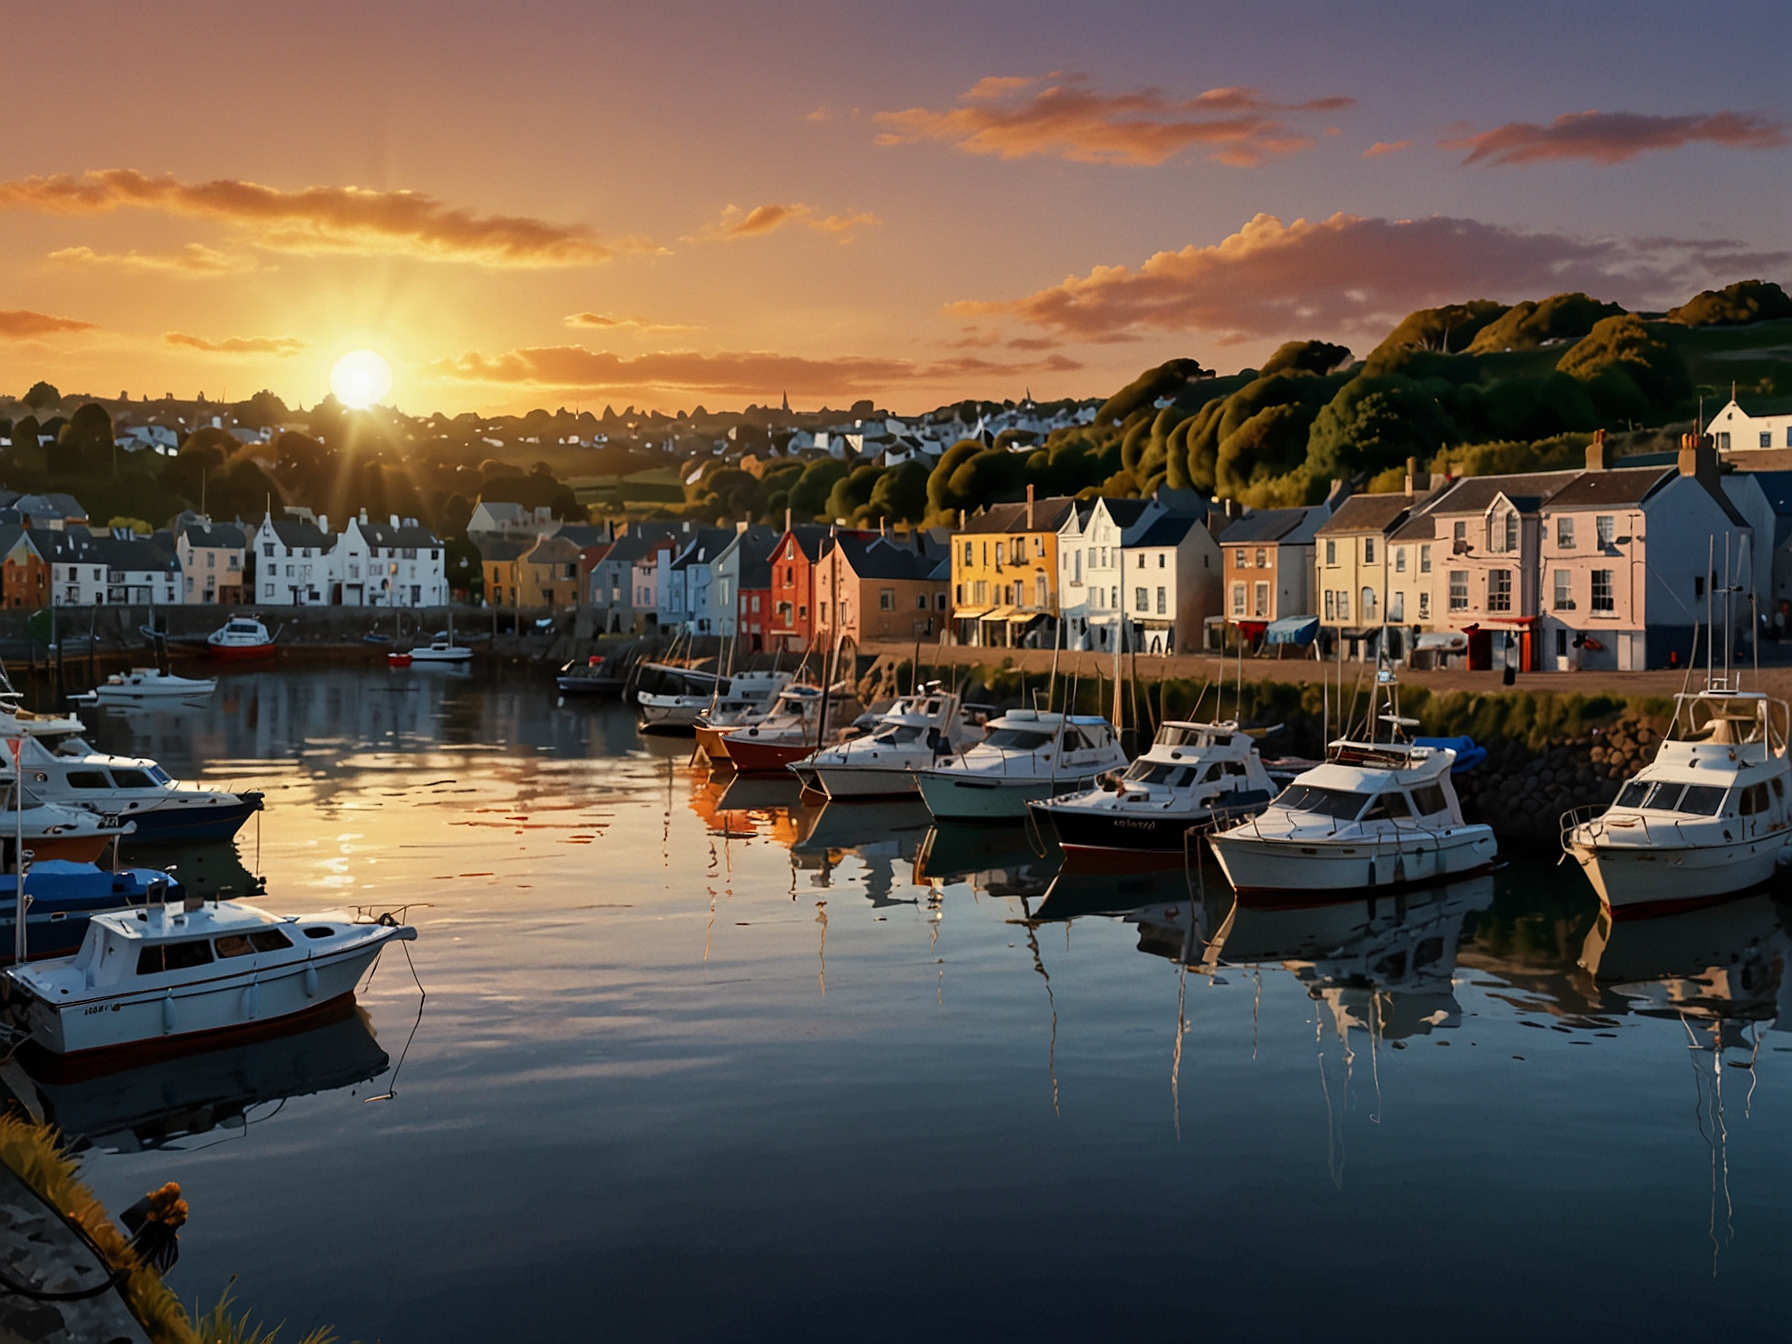 The charming Kinsale harbor at sunset, filled with boats and yachts, offering breathtaking views of the Atlantic Ocean and creating a serene, picturesque coastal scene.